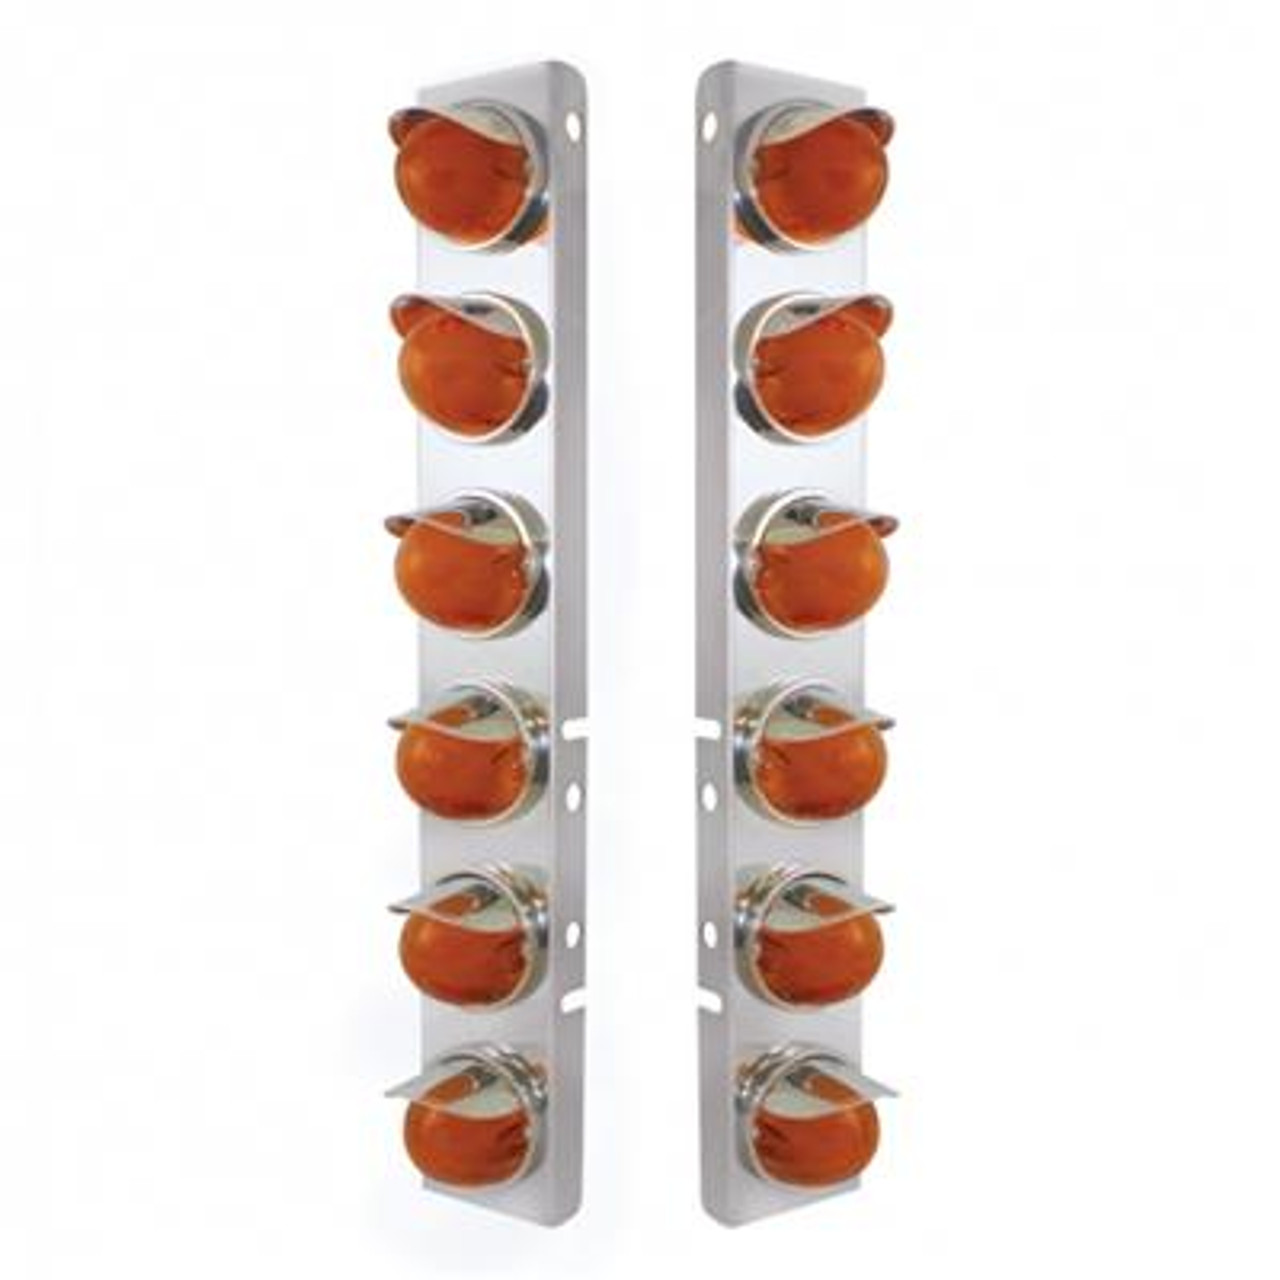 SS Front Air Cleaner Brkt With 12X 9 Amber Hi/Lo LED Watermelon GloLight & Visors For Peterbilt-Amber Lens